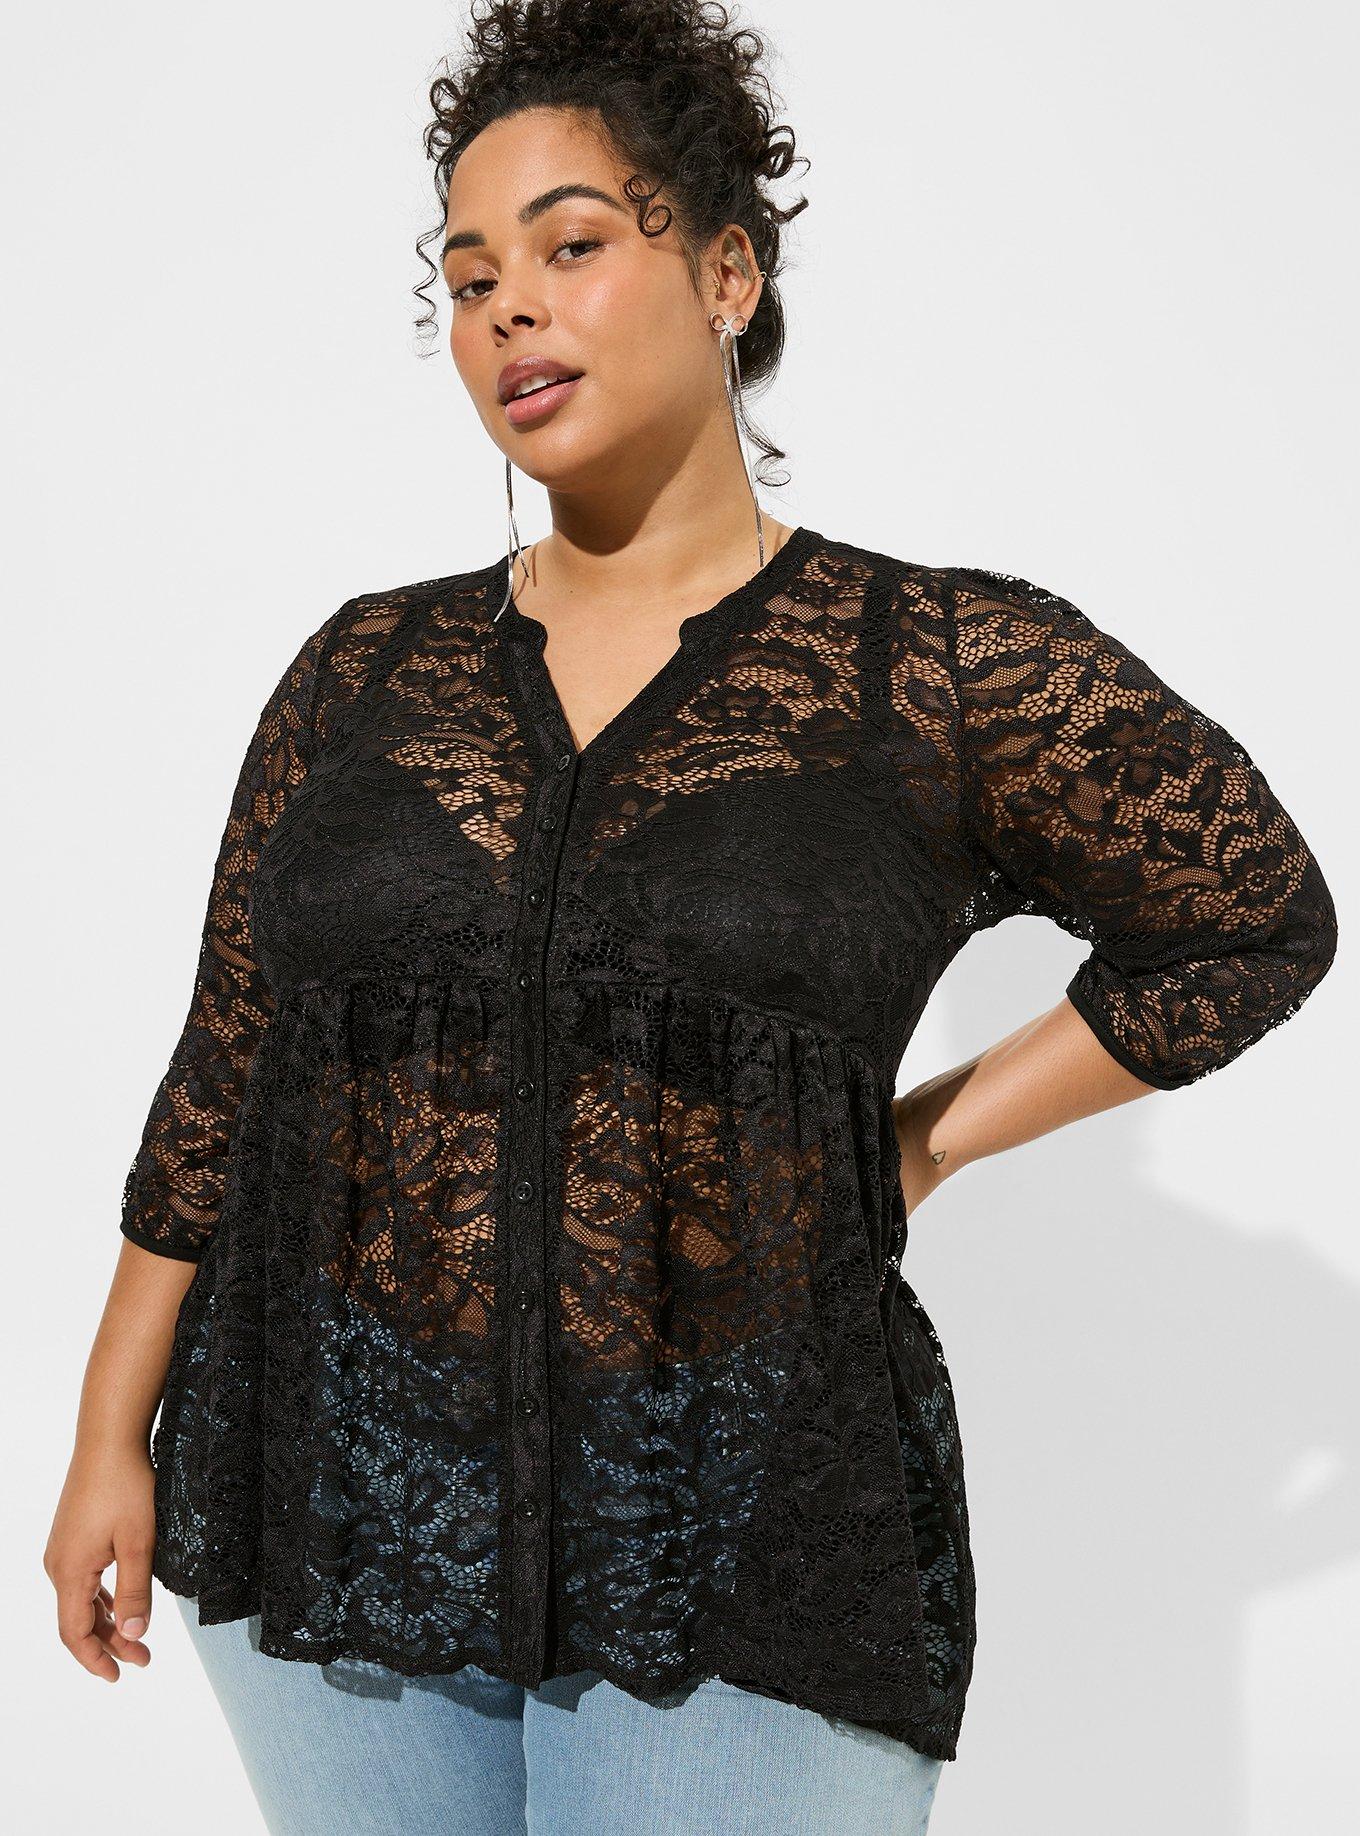 Plus Size - Babydoll Sheer Lace Button Down Tunic Top - Torrid